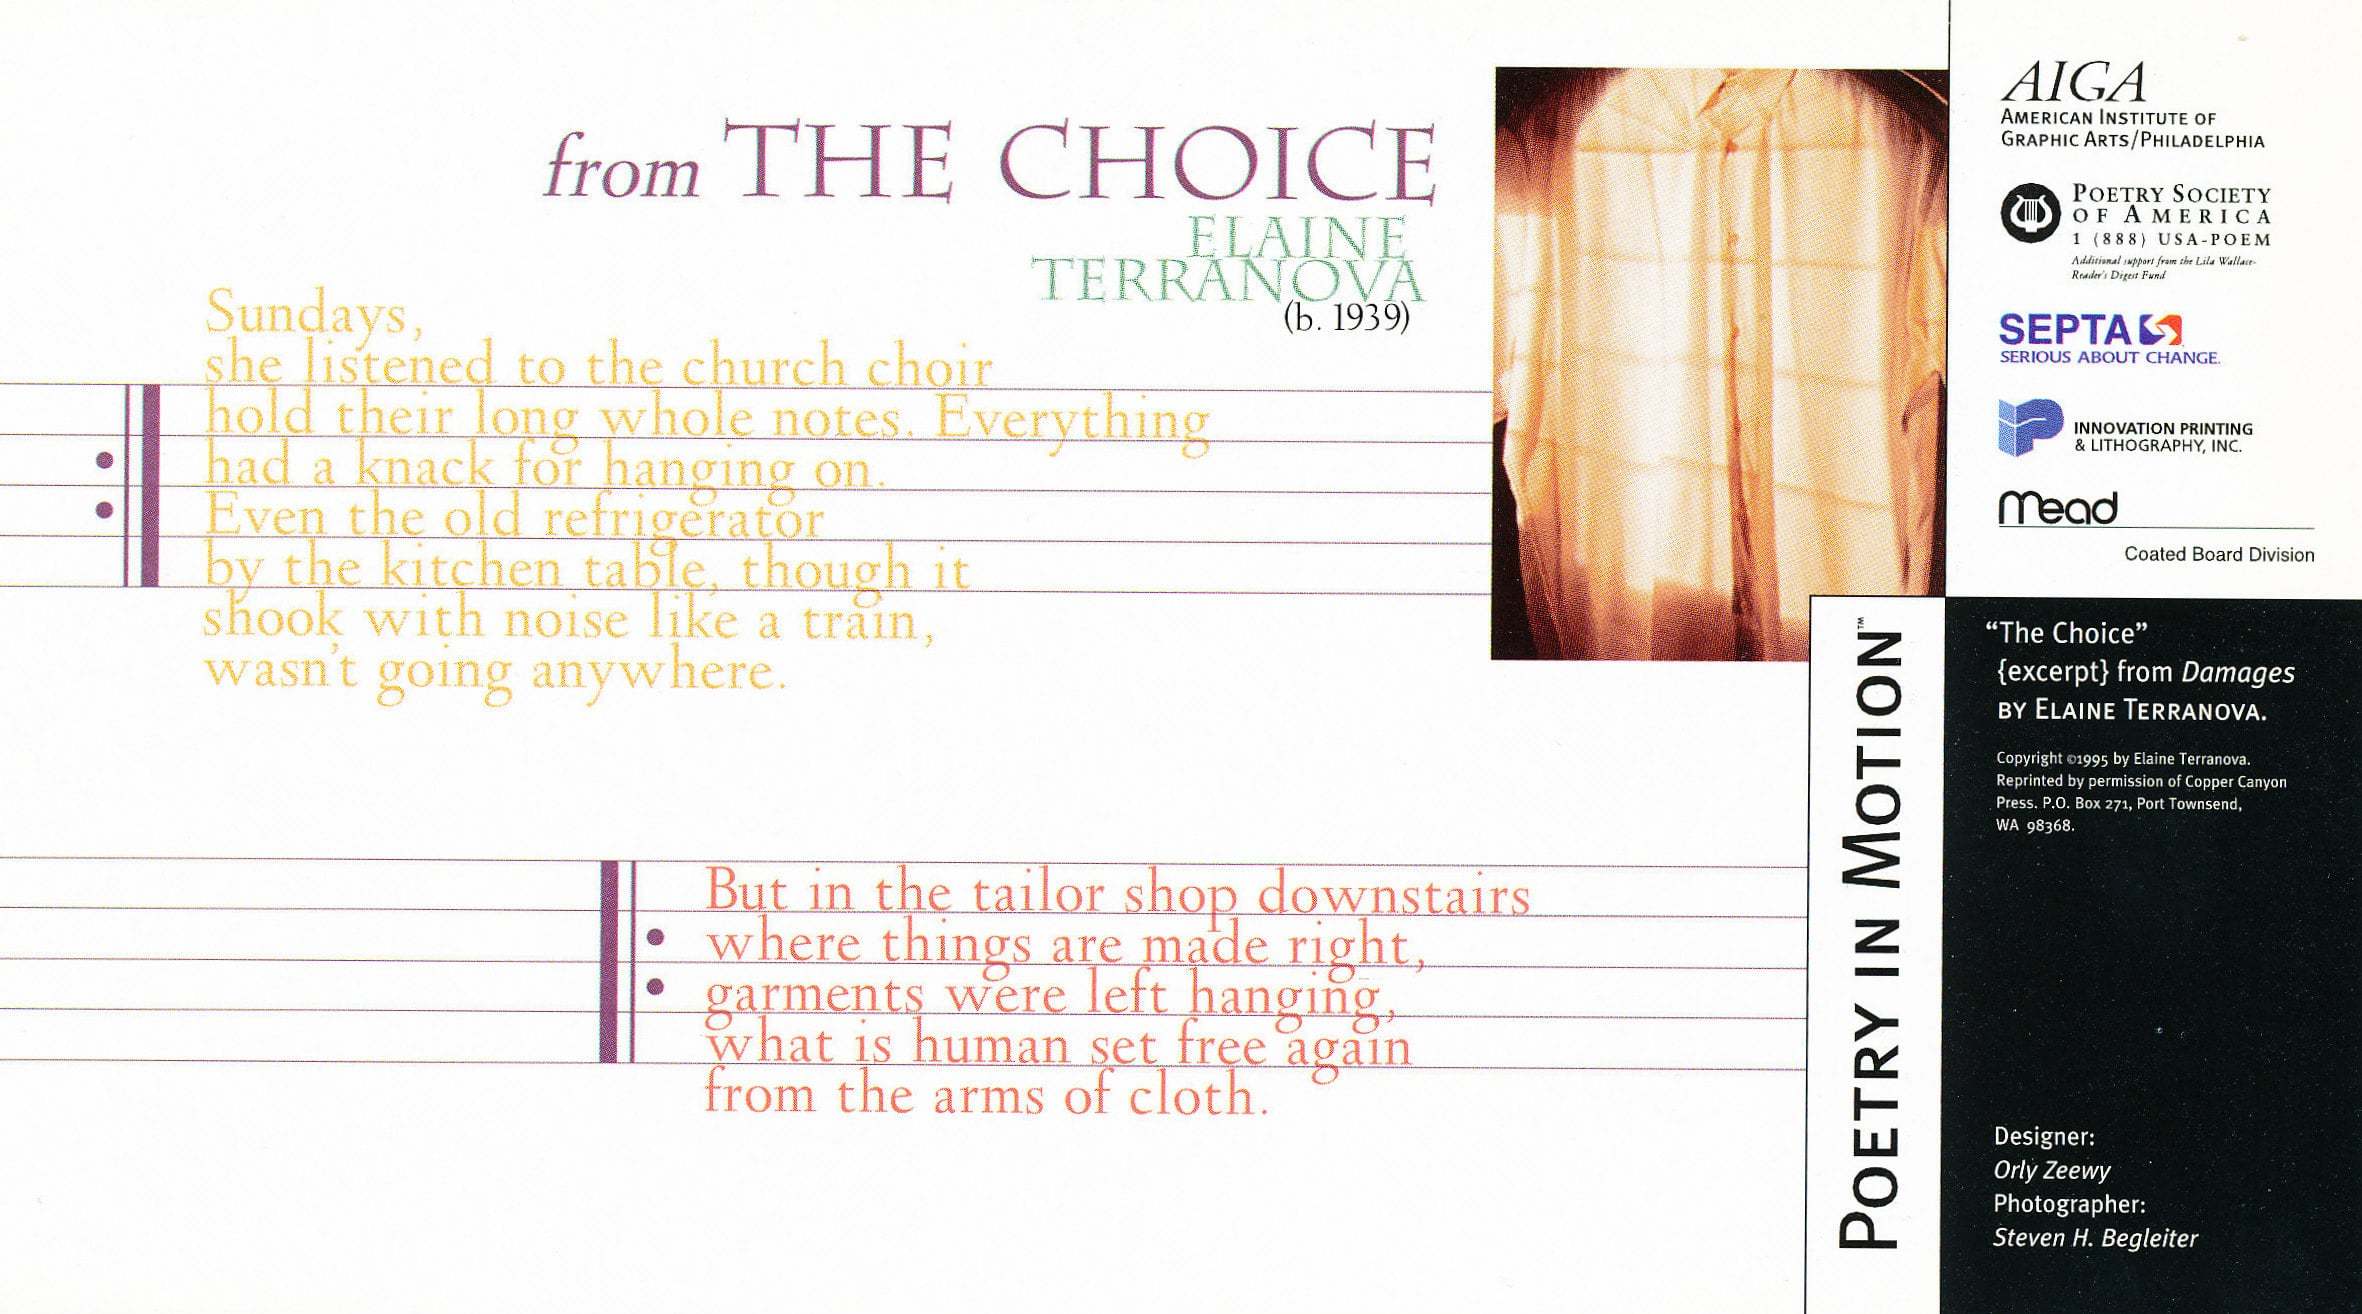 A white poster features an excerpt from the poem, The Choice, by Elaine Terranova. The poem is written on bars of music in yellow text. To the right of this is a white button up shirt.